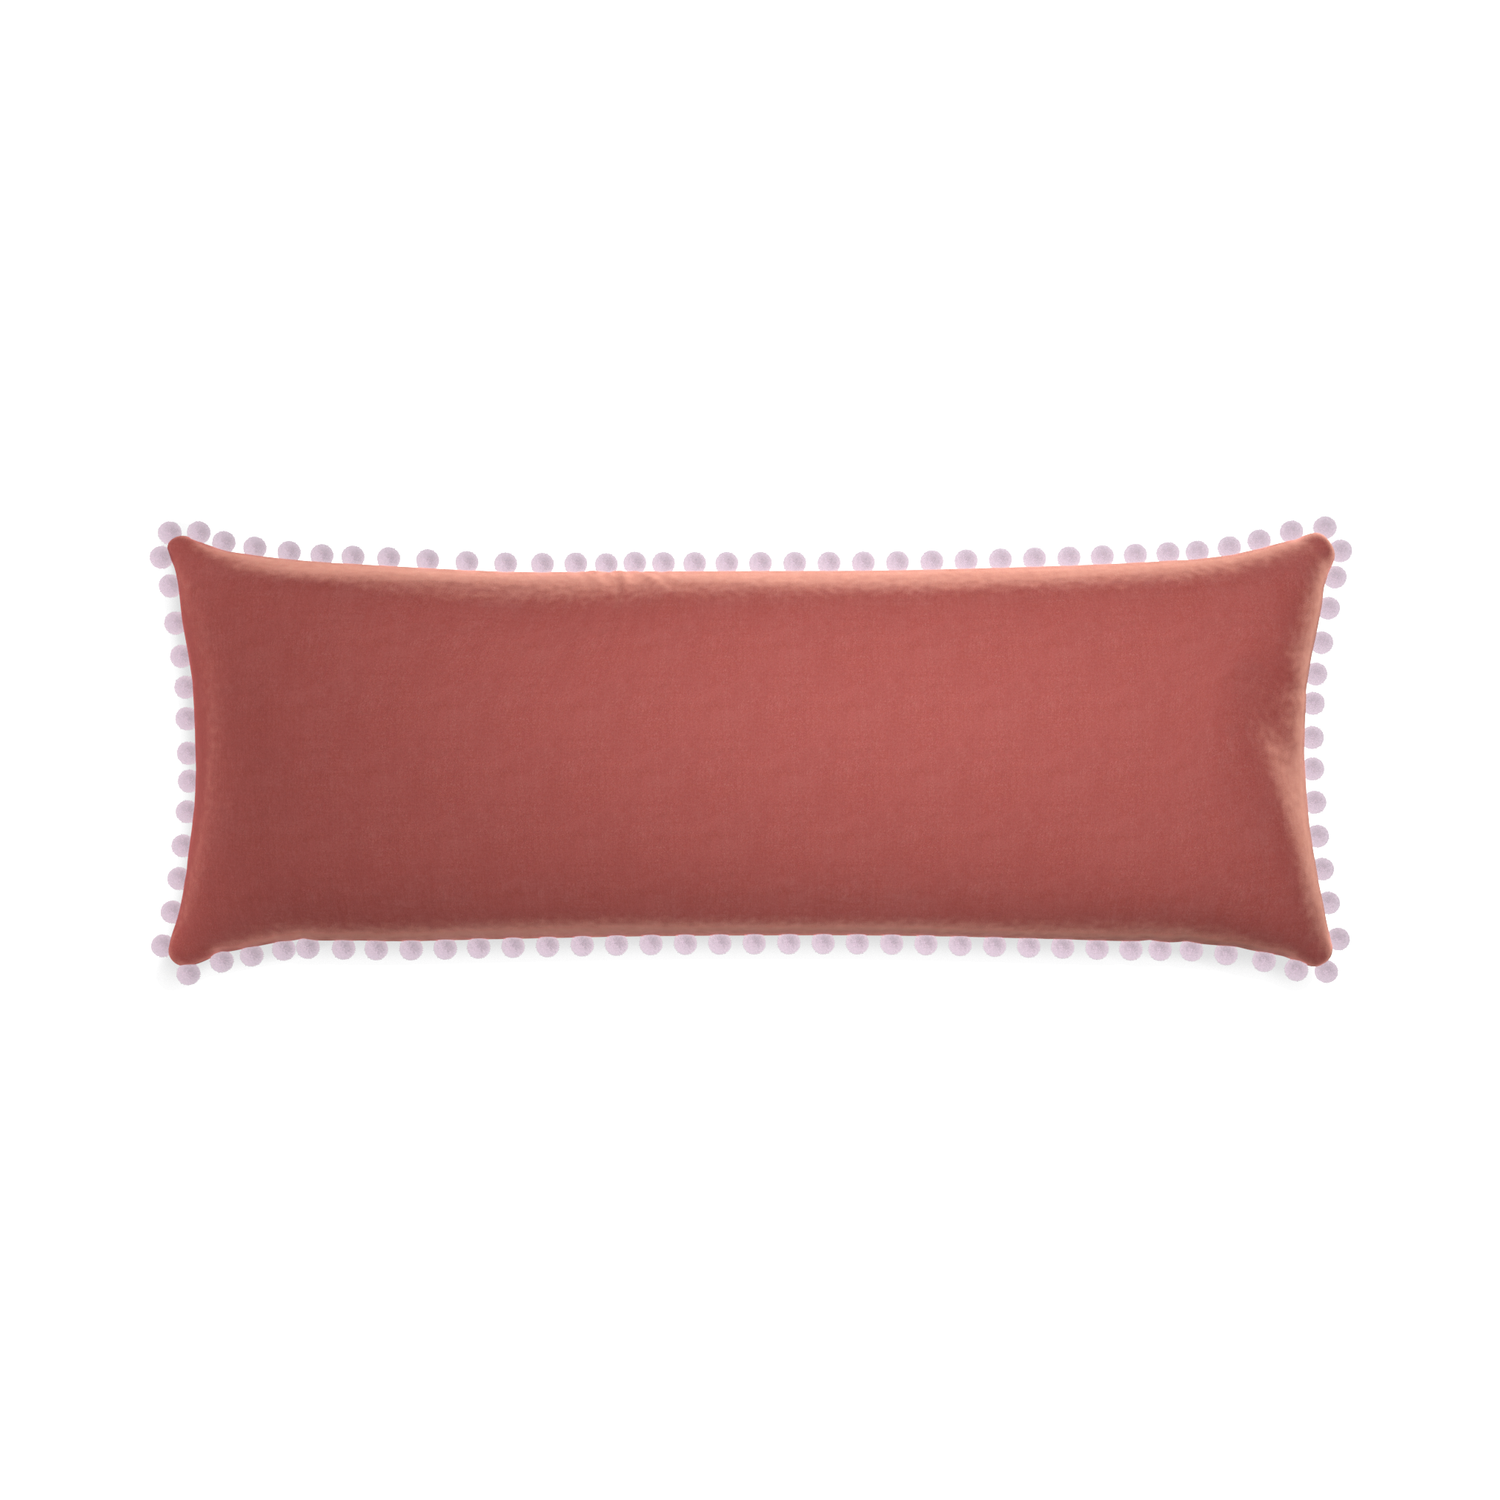 rectangle coral velvet pillow with lilac pom poms 